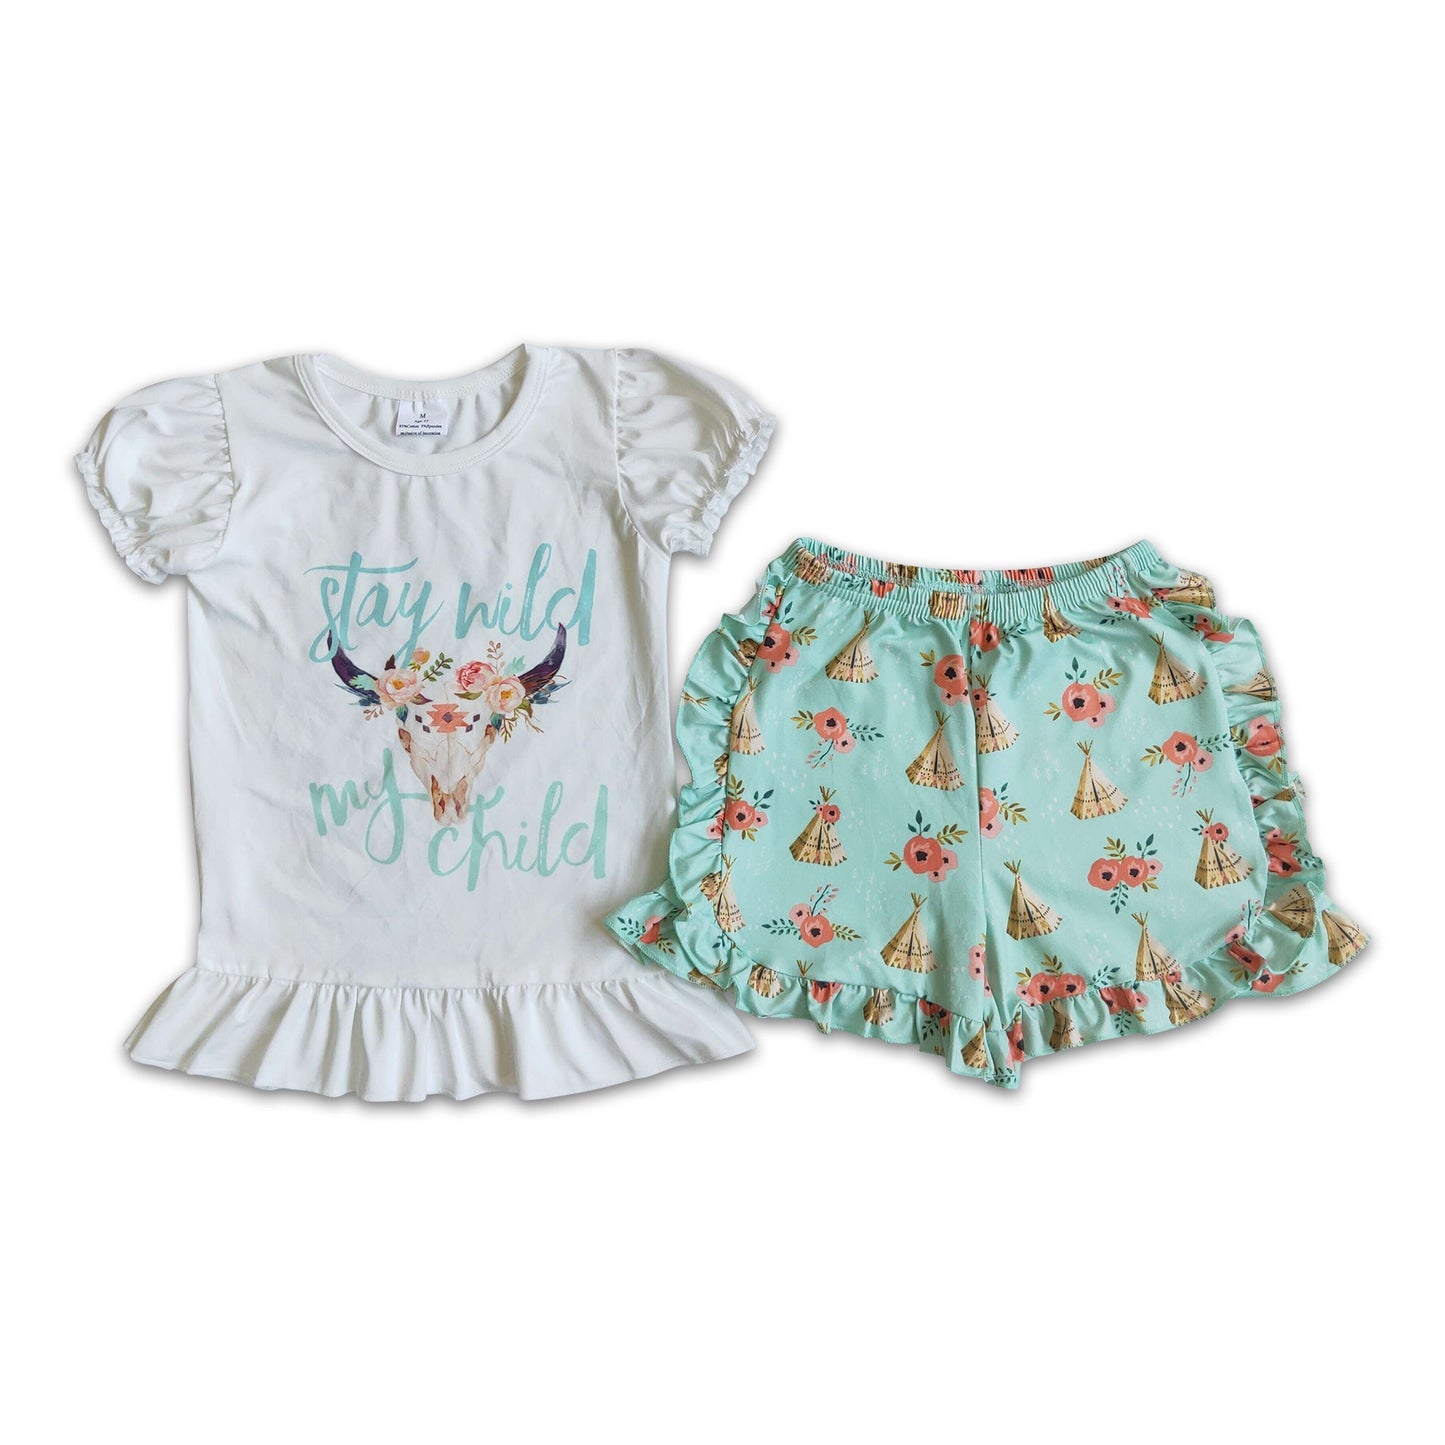 Stay Wild My Child Short Outfit